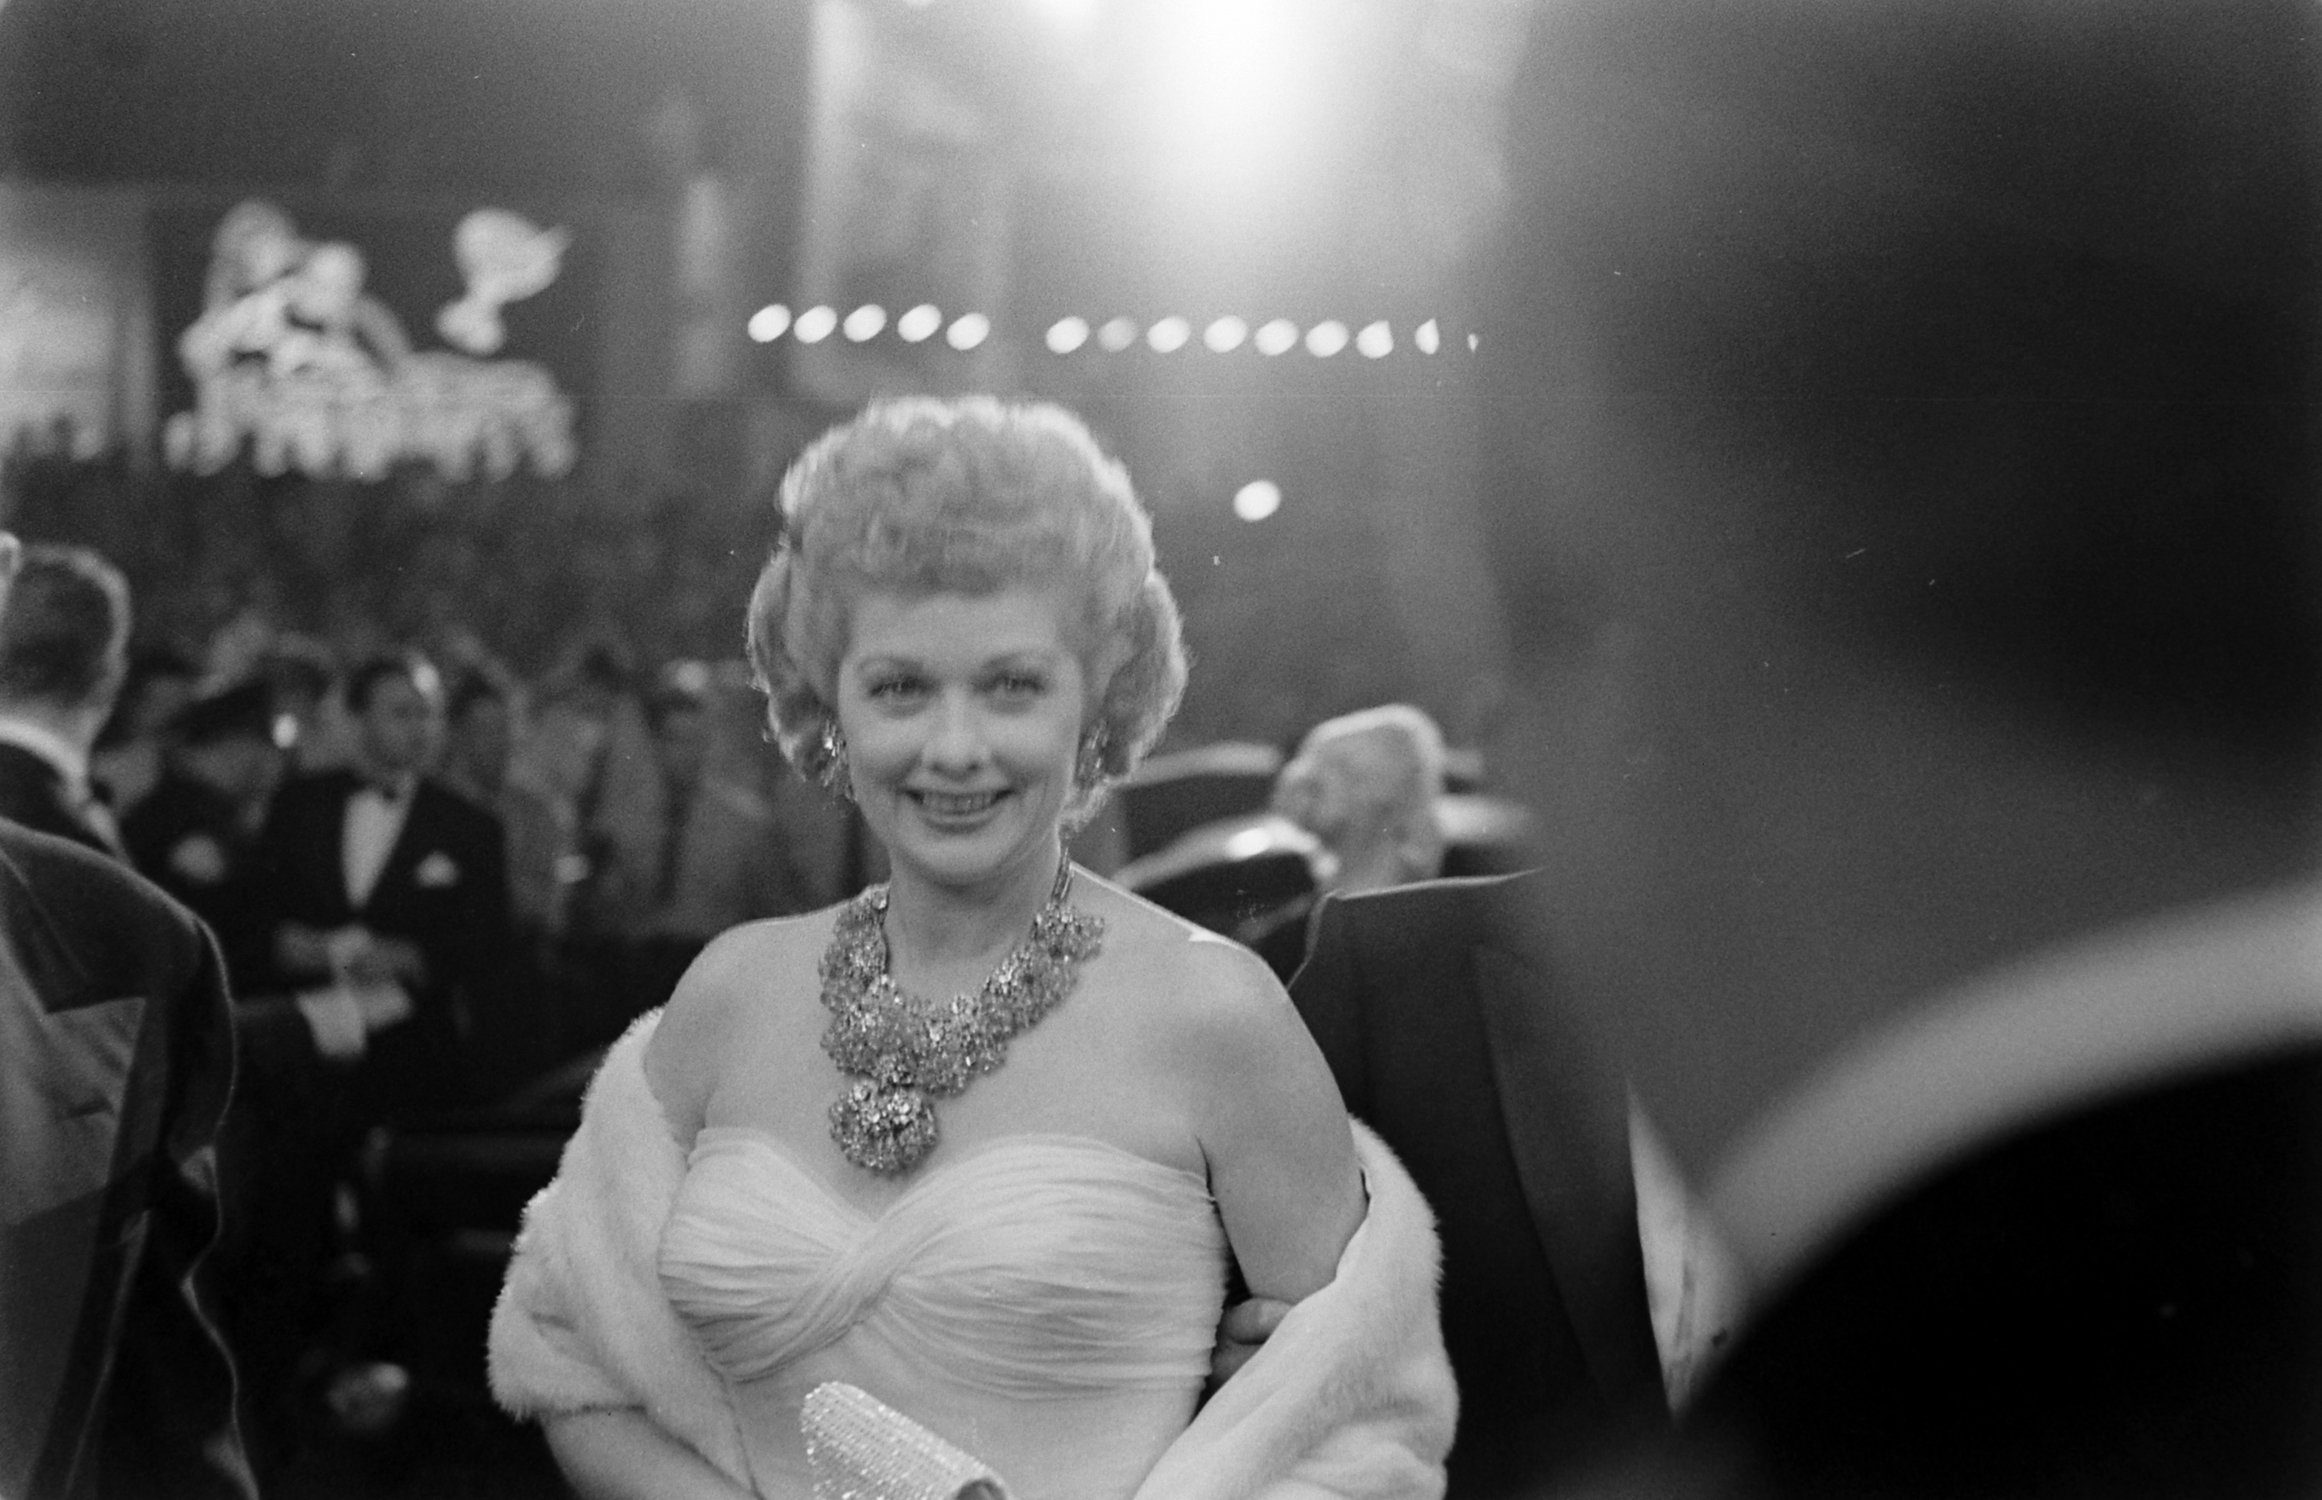 Lucille Ball | Allan Grant/The LIFE Picture Collection via Getty Images